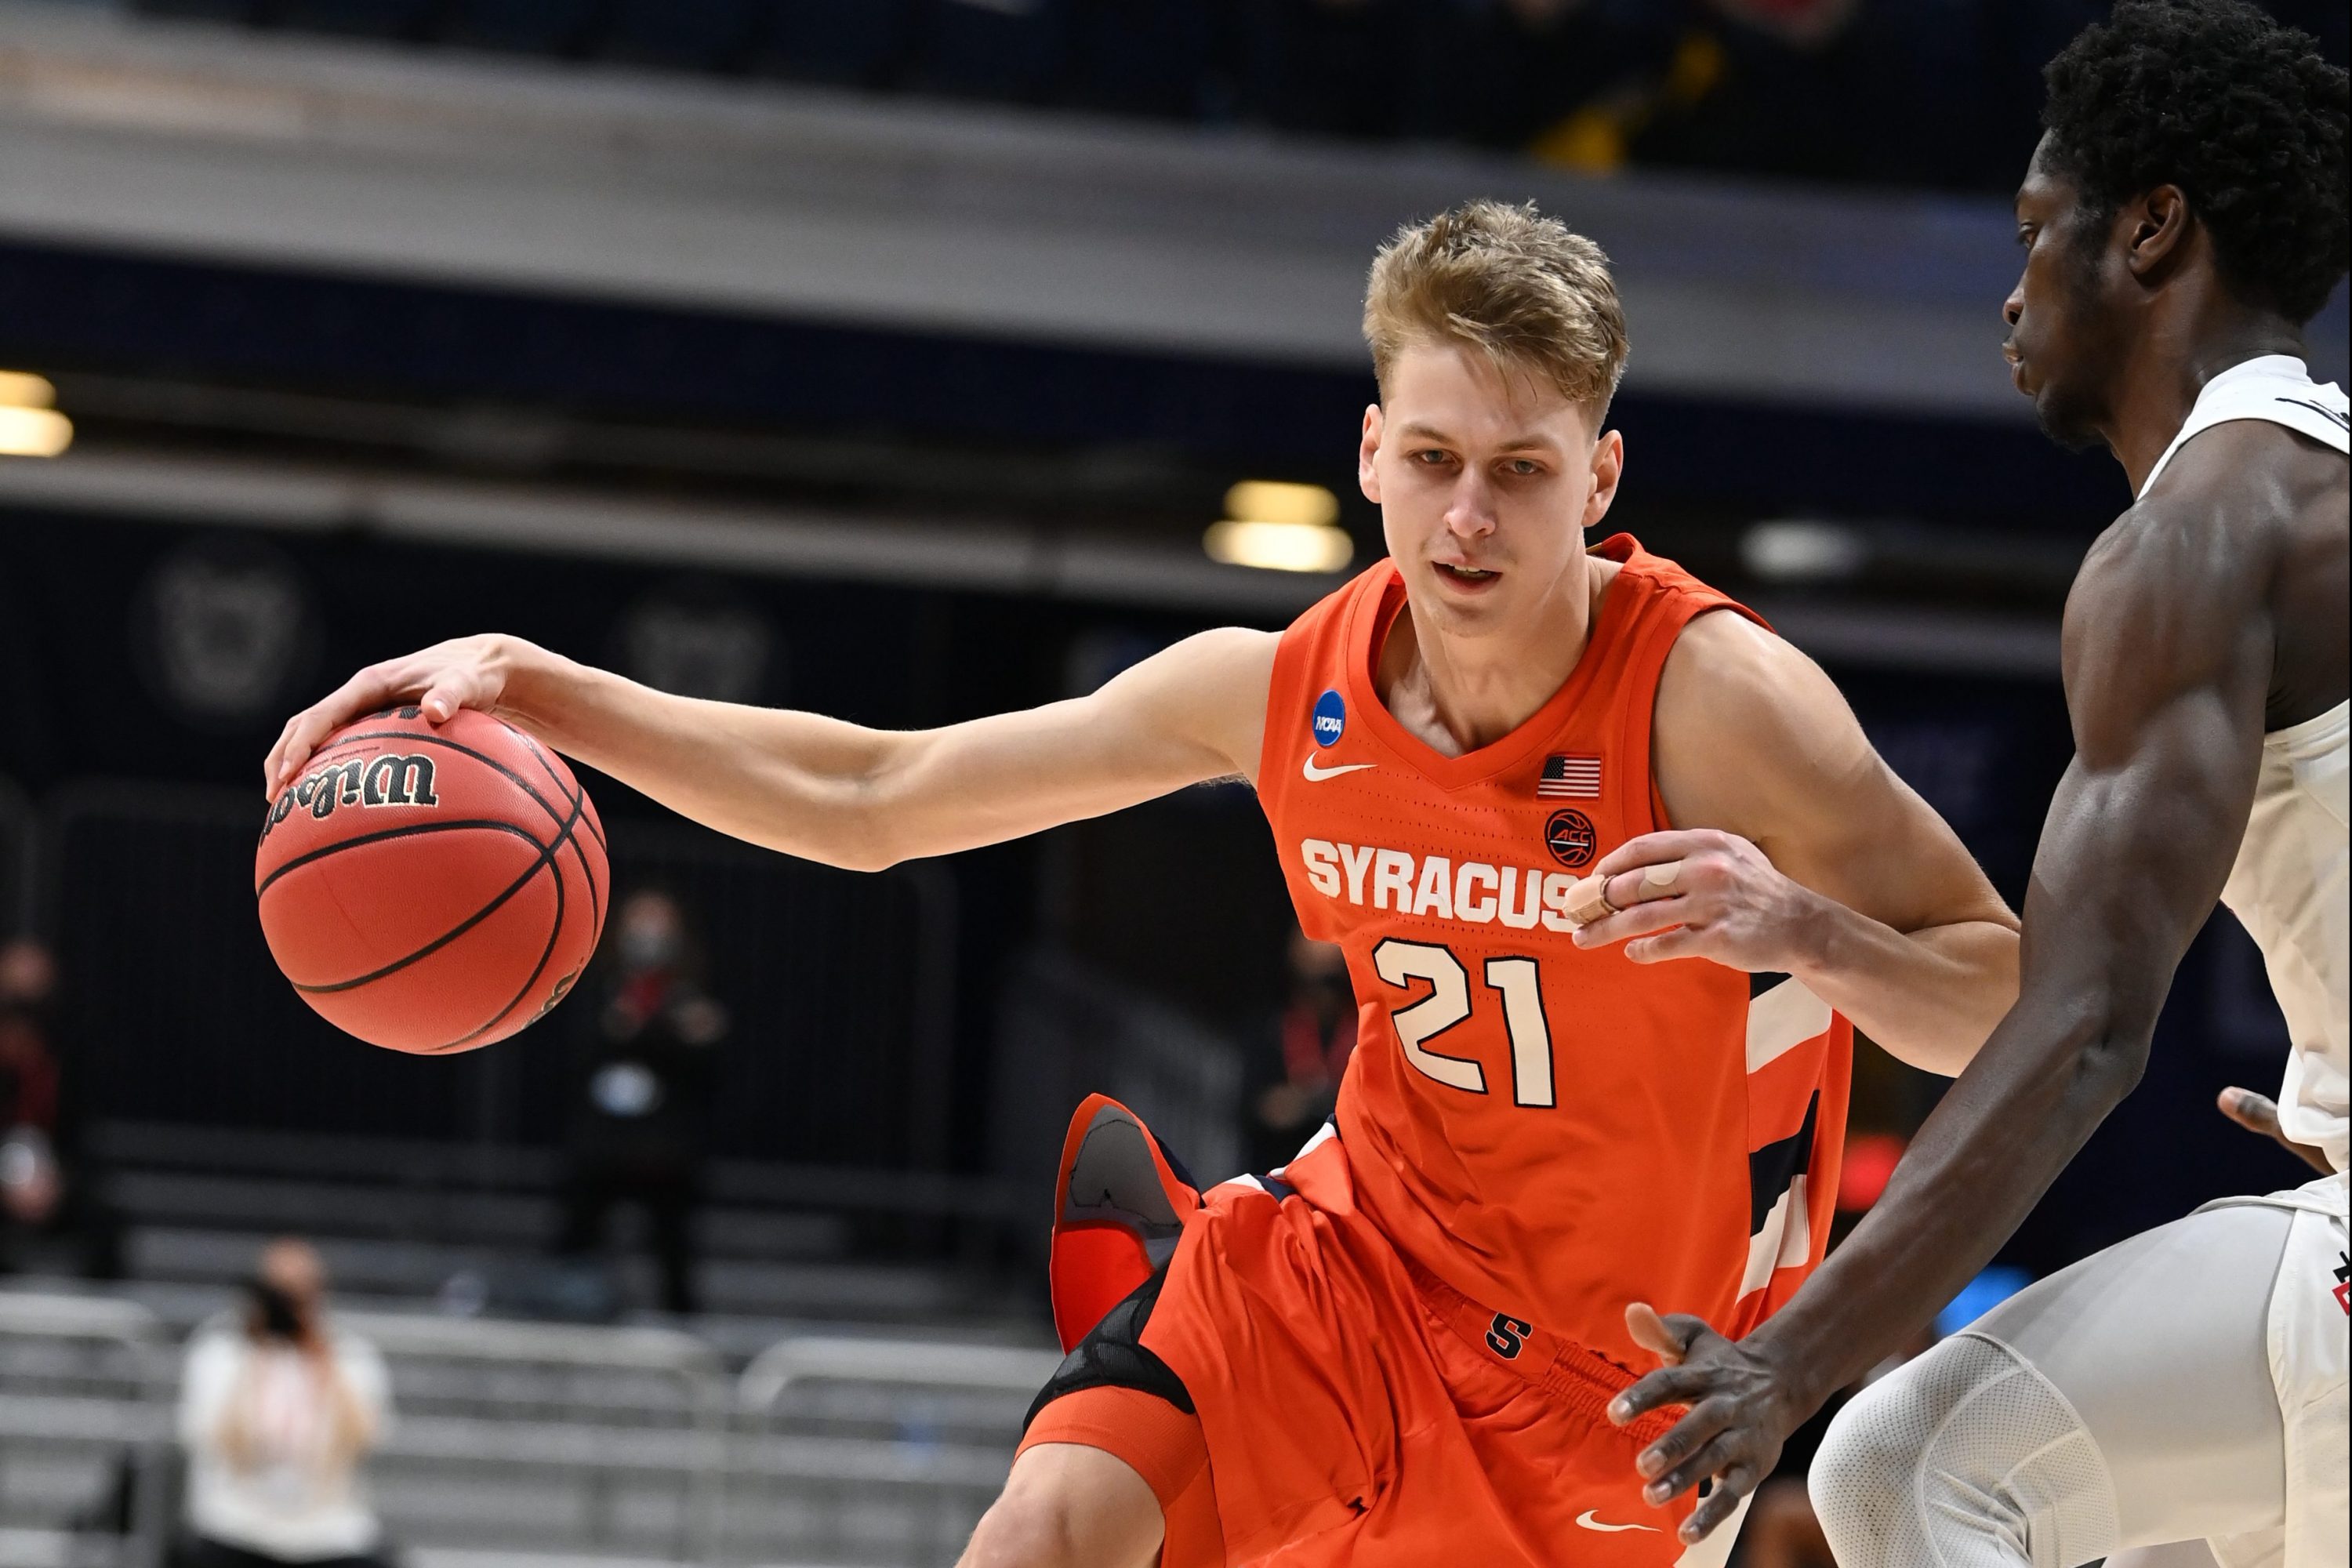 INDIANAPOLIS, IN - MARCH 19: The Syracuse Orange takes on the San Diego State Aztecs in the first round of the 2021 NCAA Division I MenÕs Basketball Tournament held at Hinkle Fieldhouse on March 19, 2021 in Indianapolis, Indiana. (Photo by Brett Wilhelm/NCAA Photos via Getty Images)